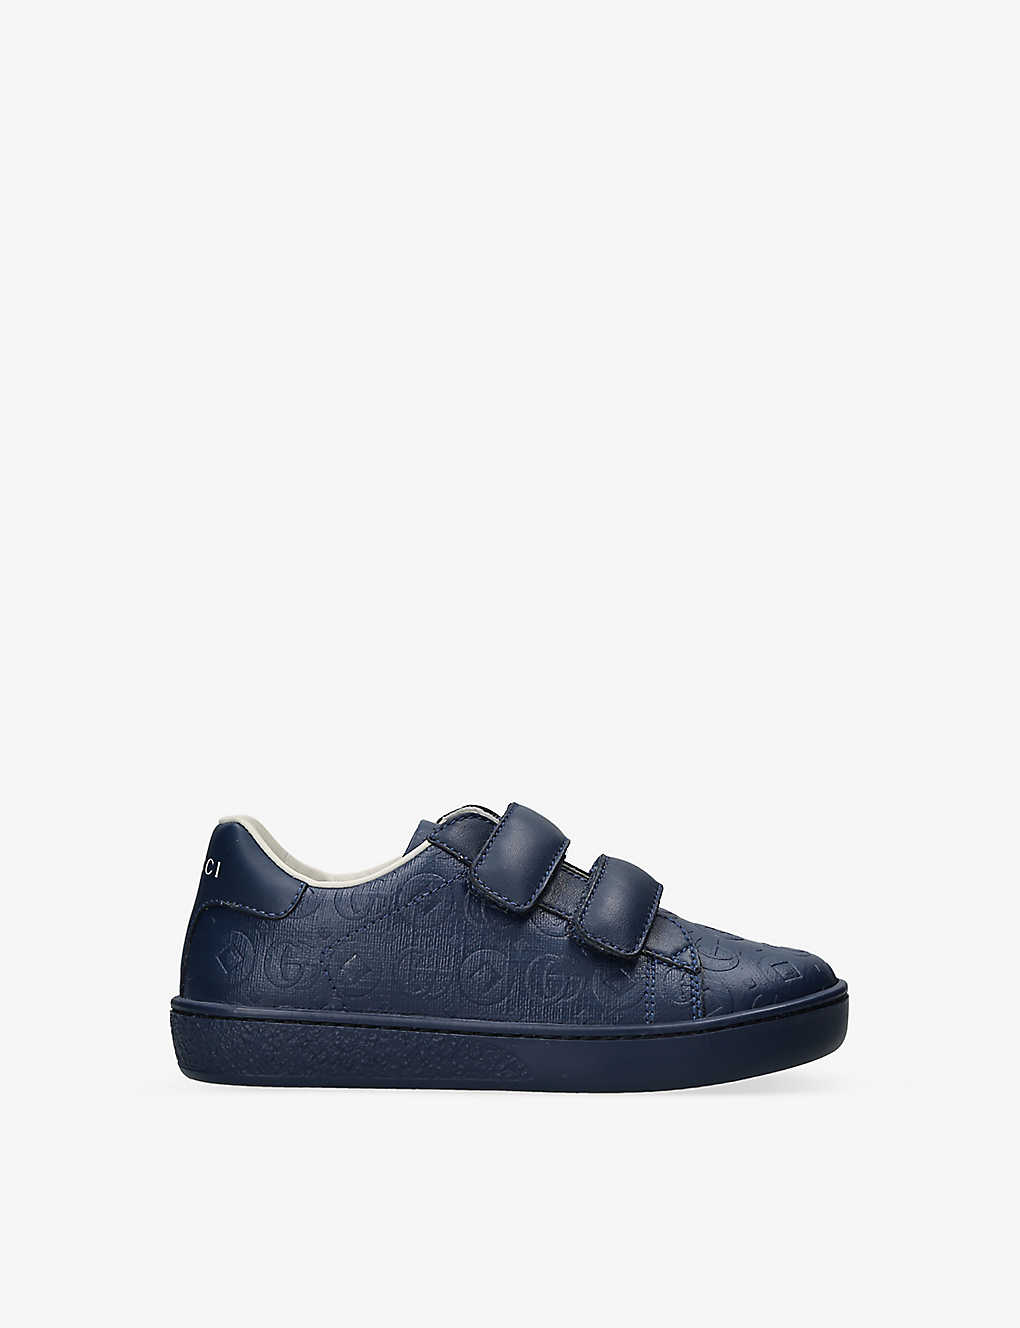 Gucci Boys Navy Kids New Ace Embossed Leather Trainers 1-4 Years